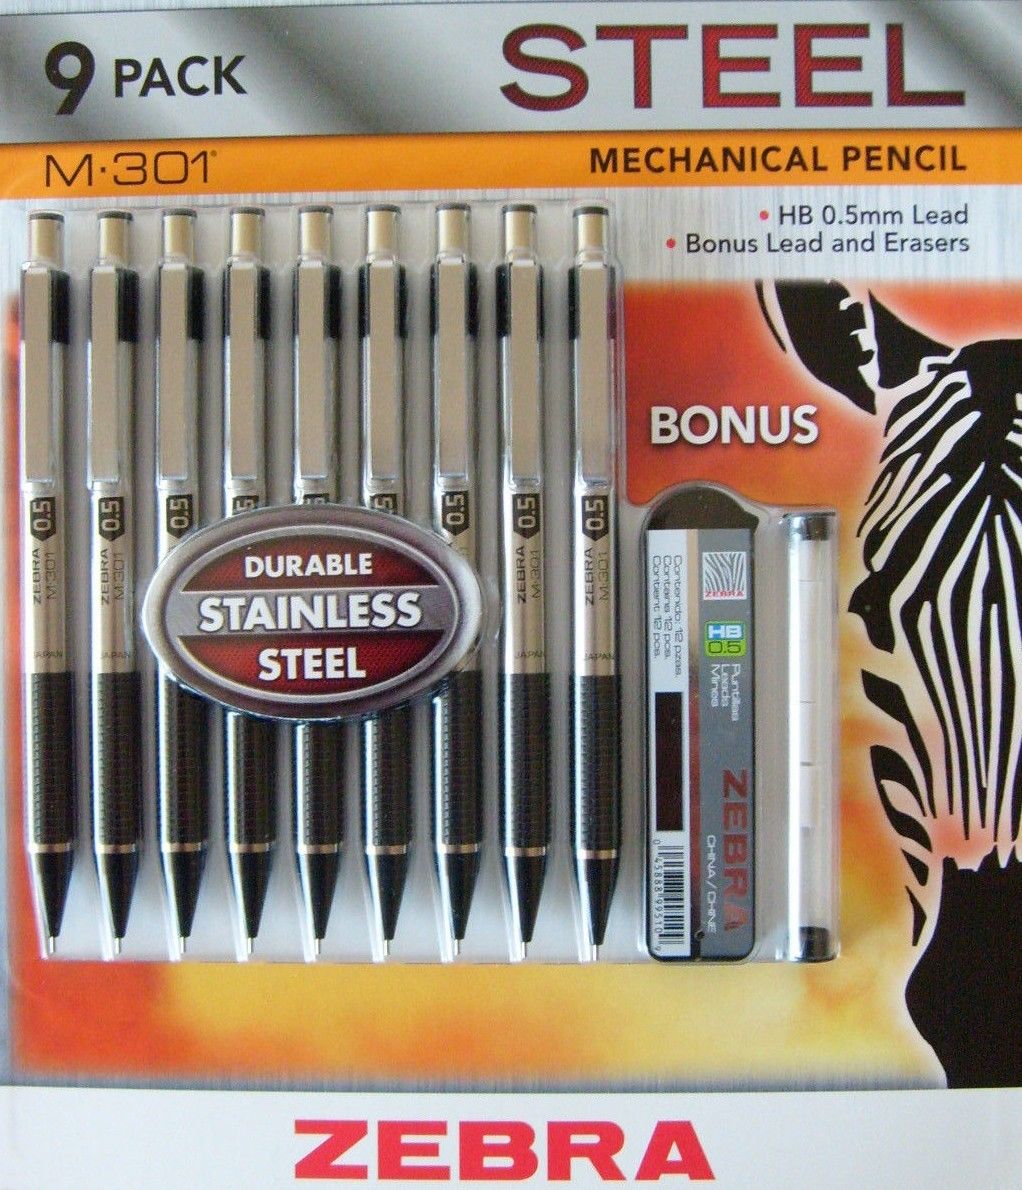 (2) New 9ct Zebra M301 Stainless Steel Mechanical Pencil -- US Delivery